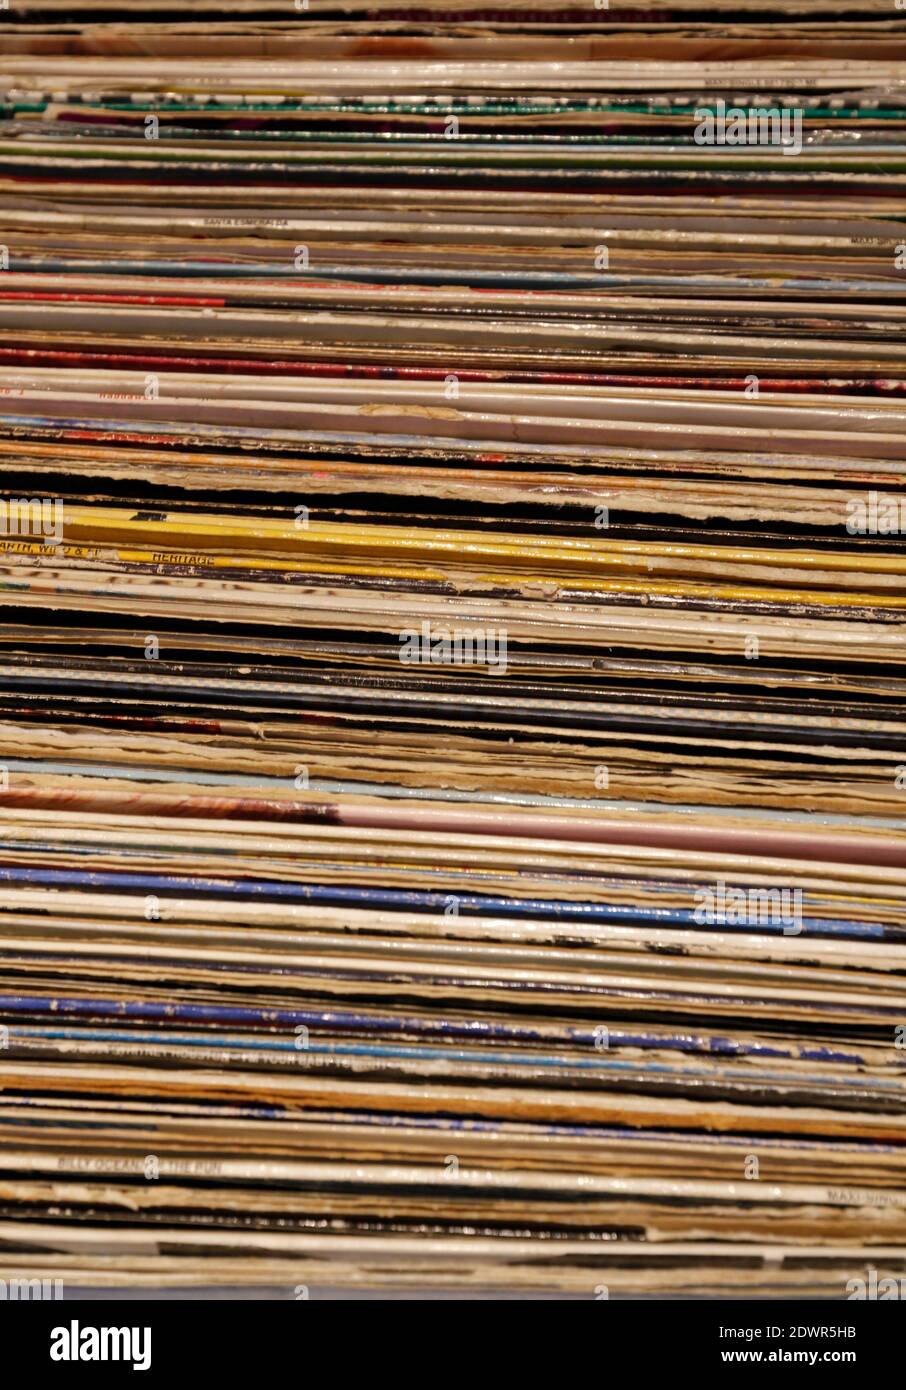 Full Frame Shot Of Stacked Record Covers Stock Photo